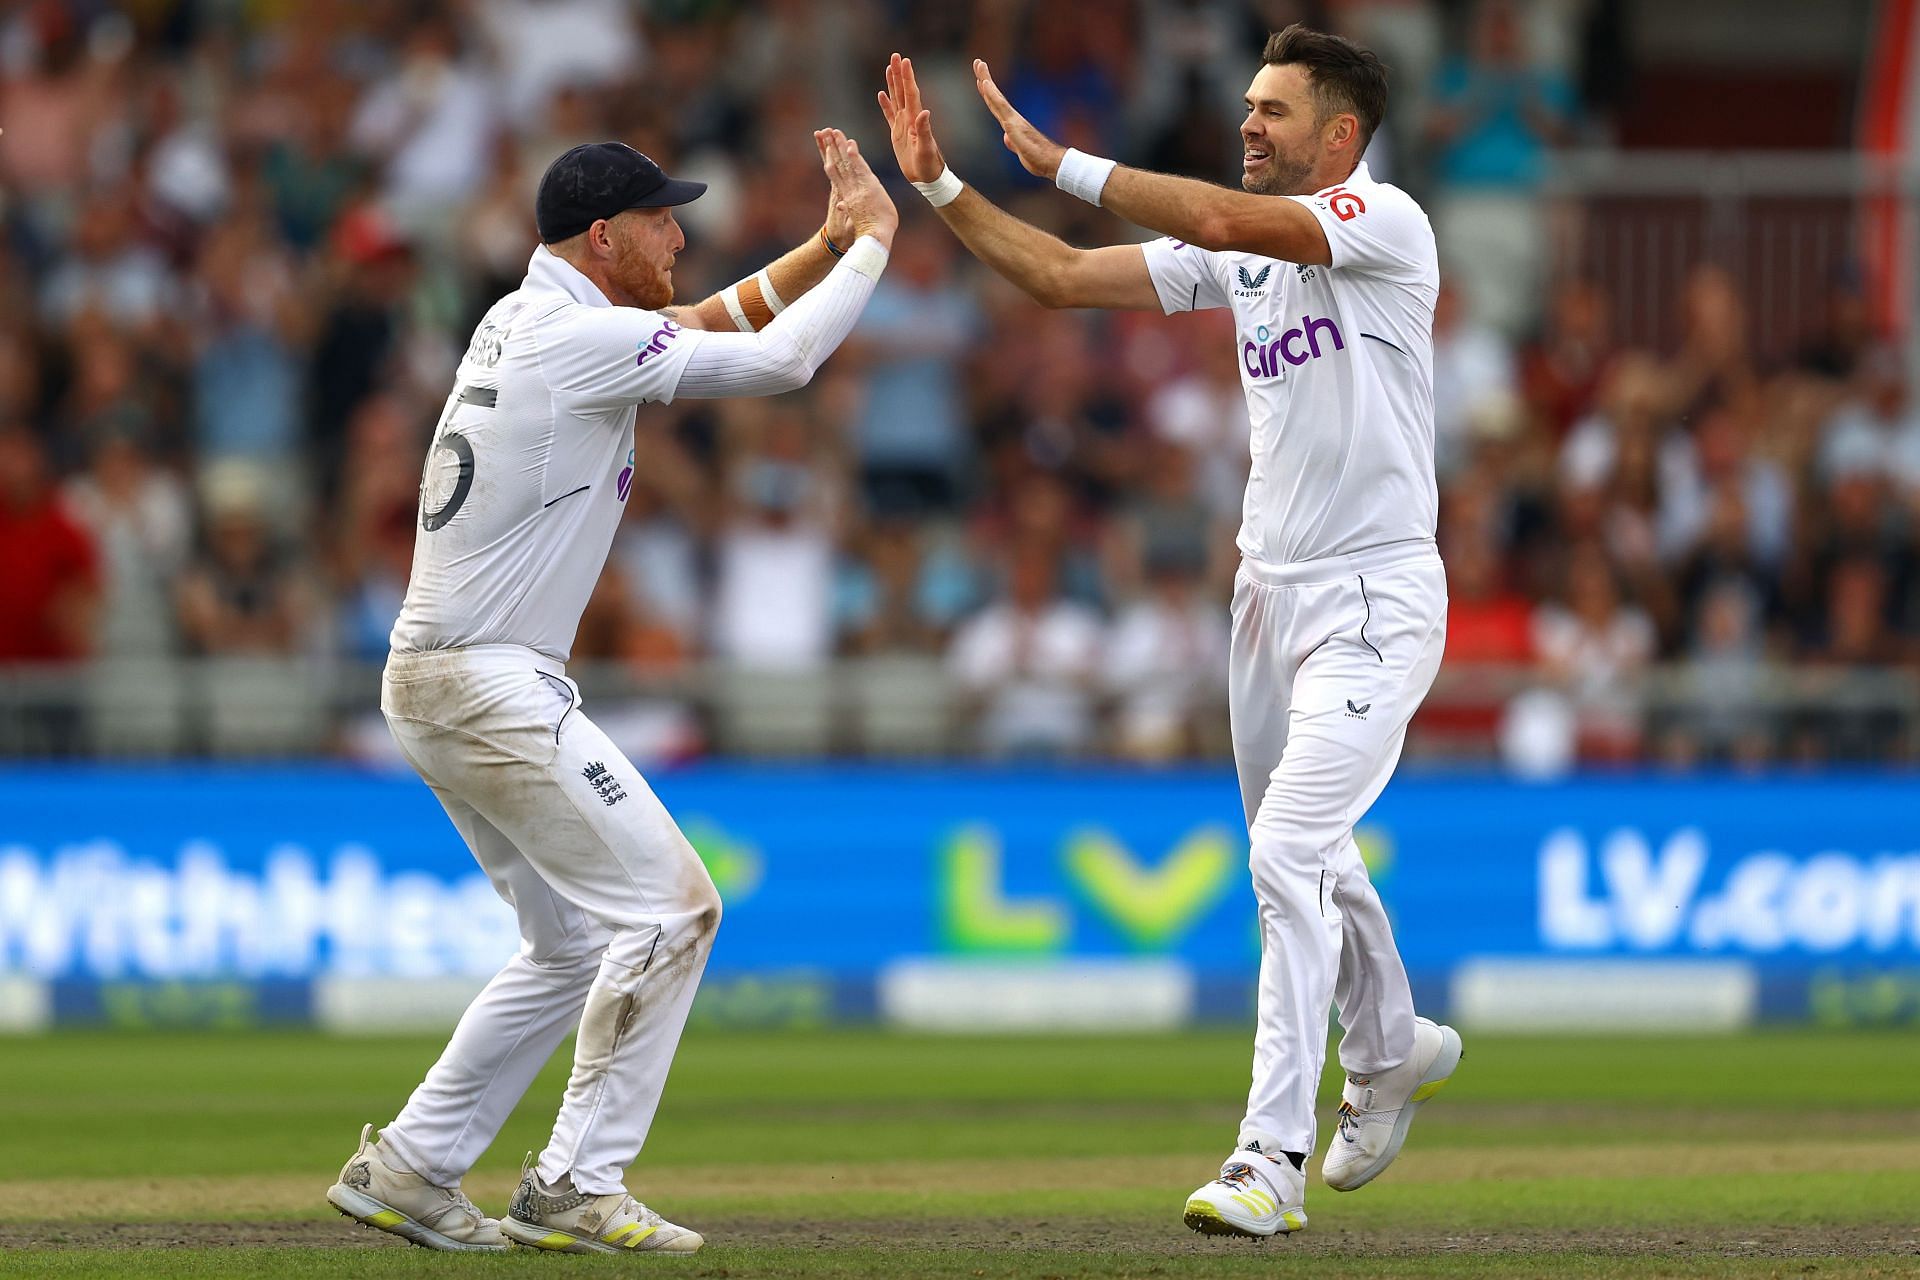 Ben Stokes and James Anderson. (Image Credits: Getty)